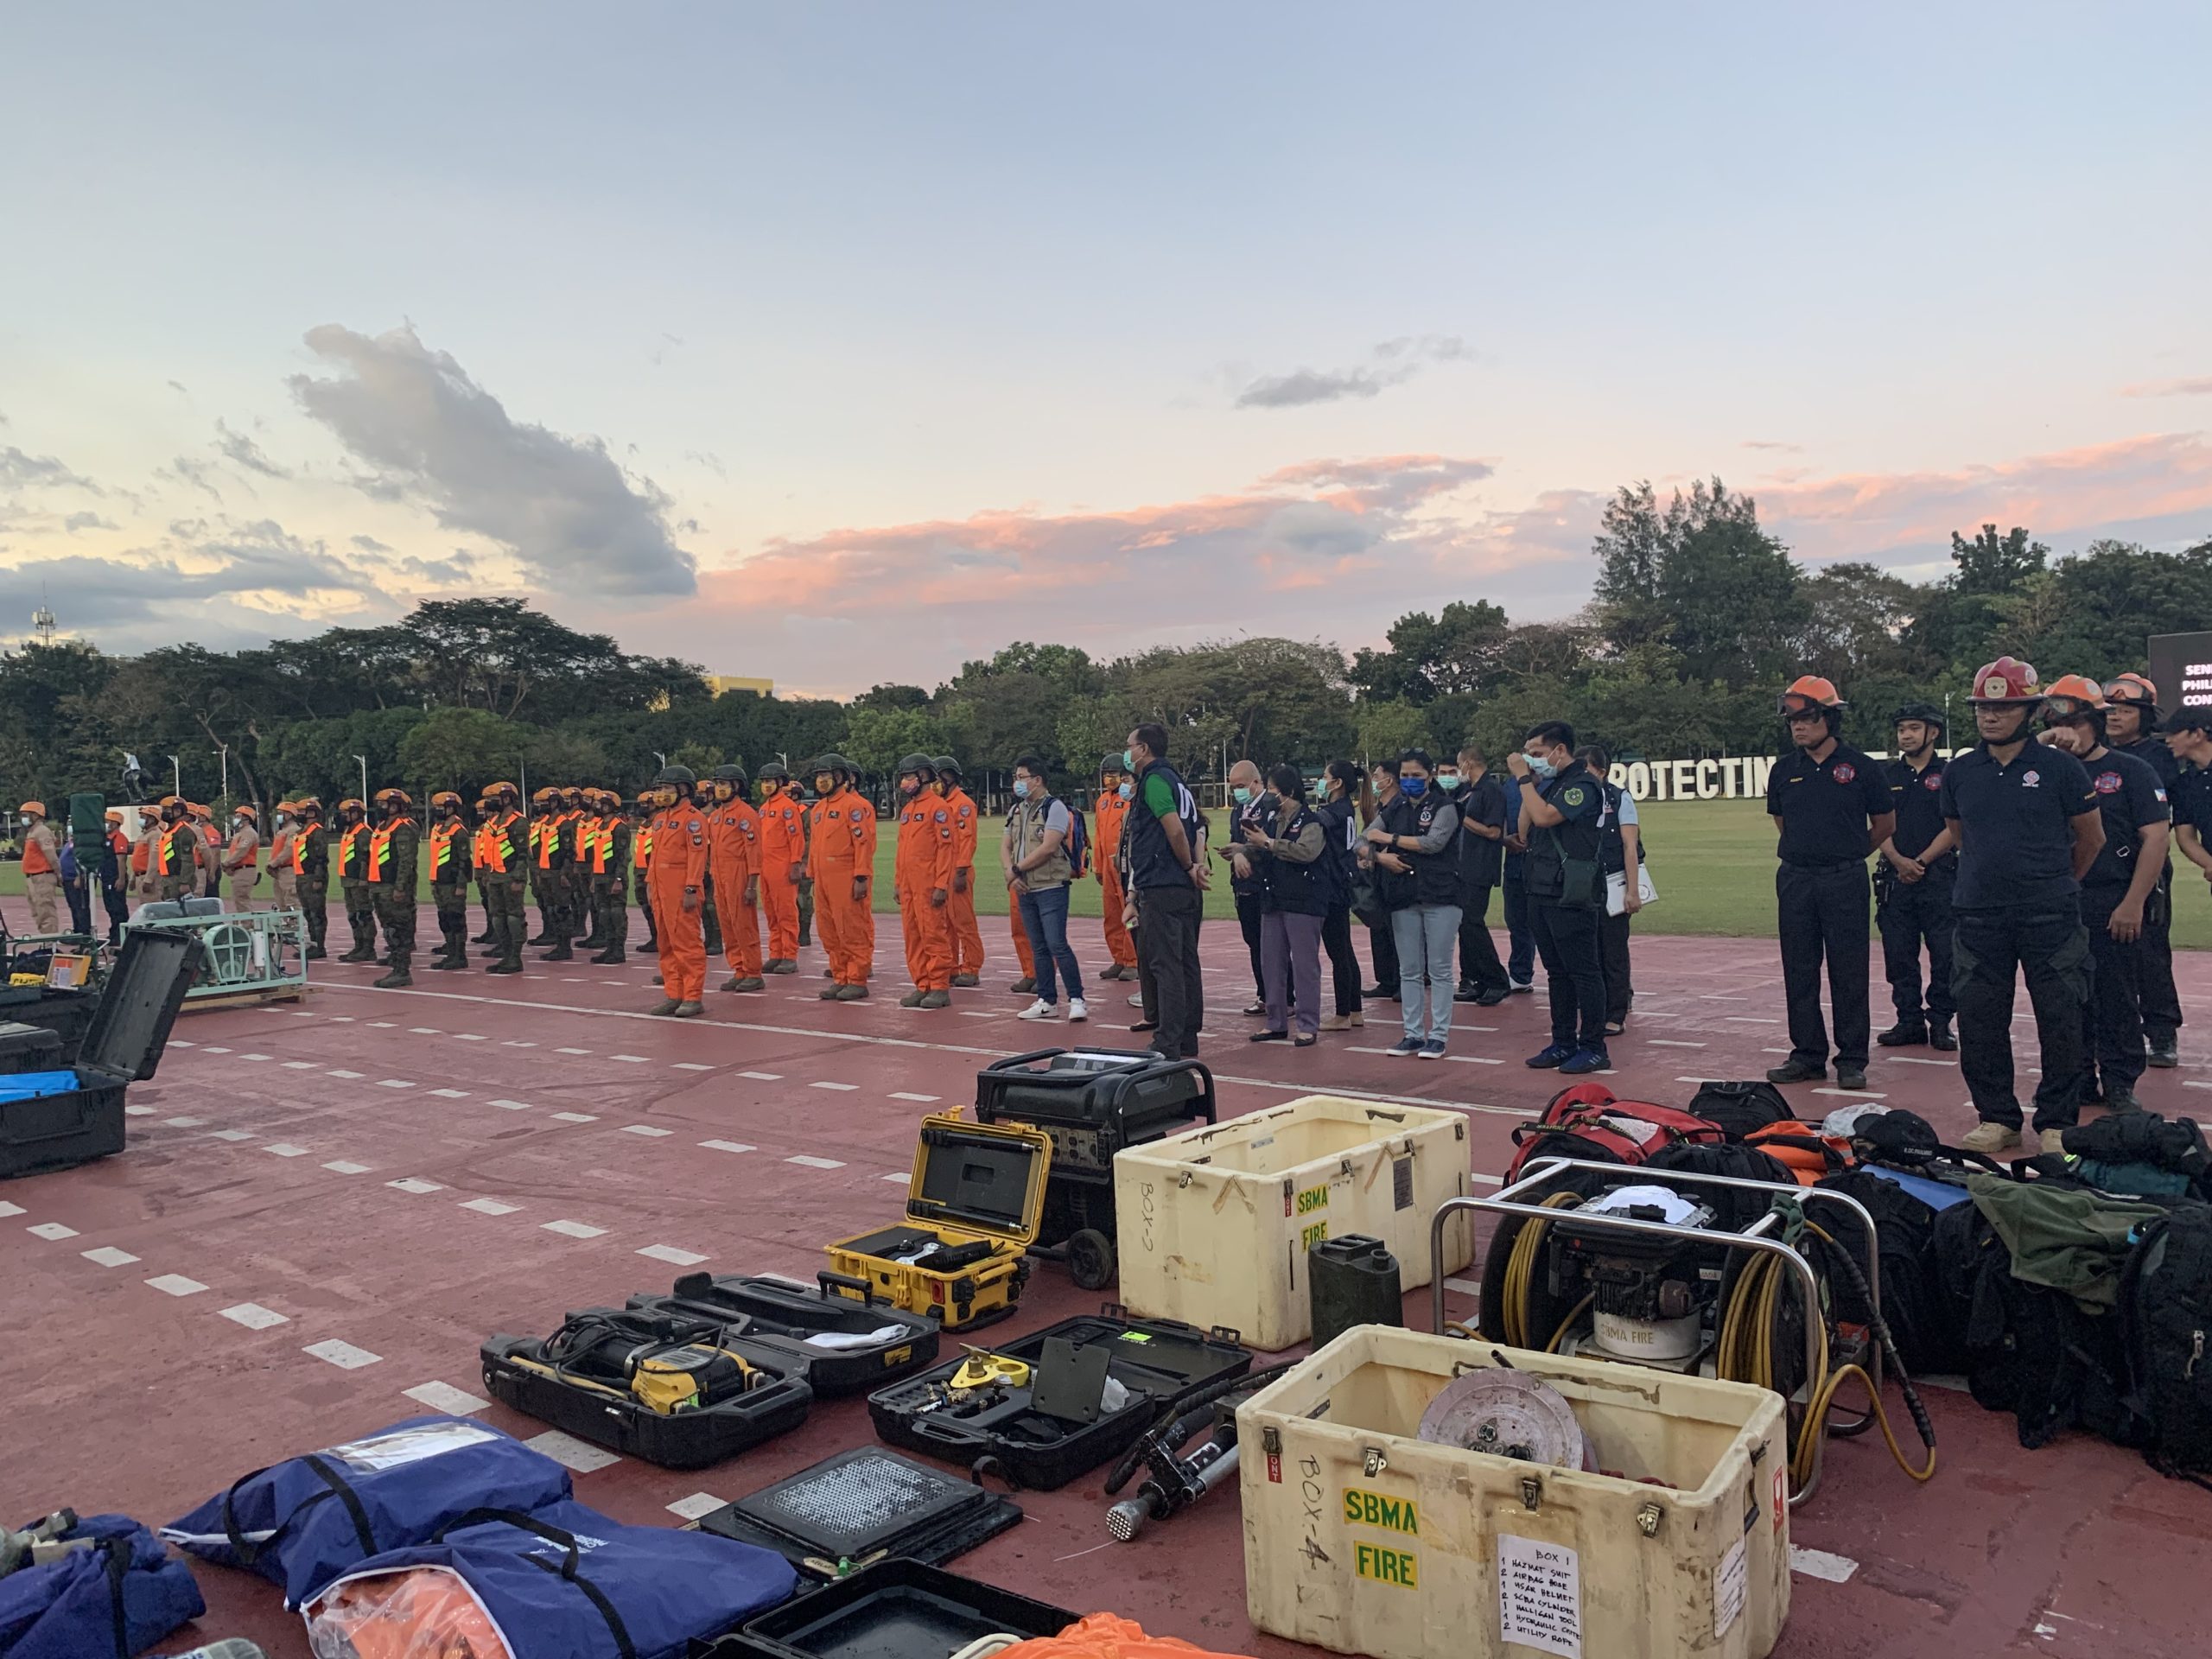 The Philippine rescue and medical team deployed in earthquake-hit Turkey will stop its operations on February 24, Office of Civil Defense spokesperson Raffy Alejandro said on Tuesday.